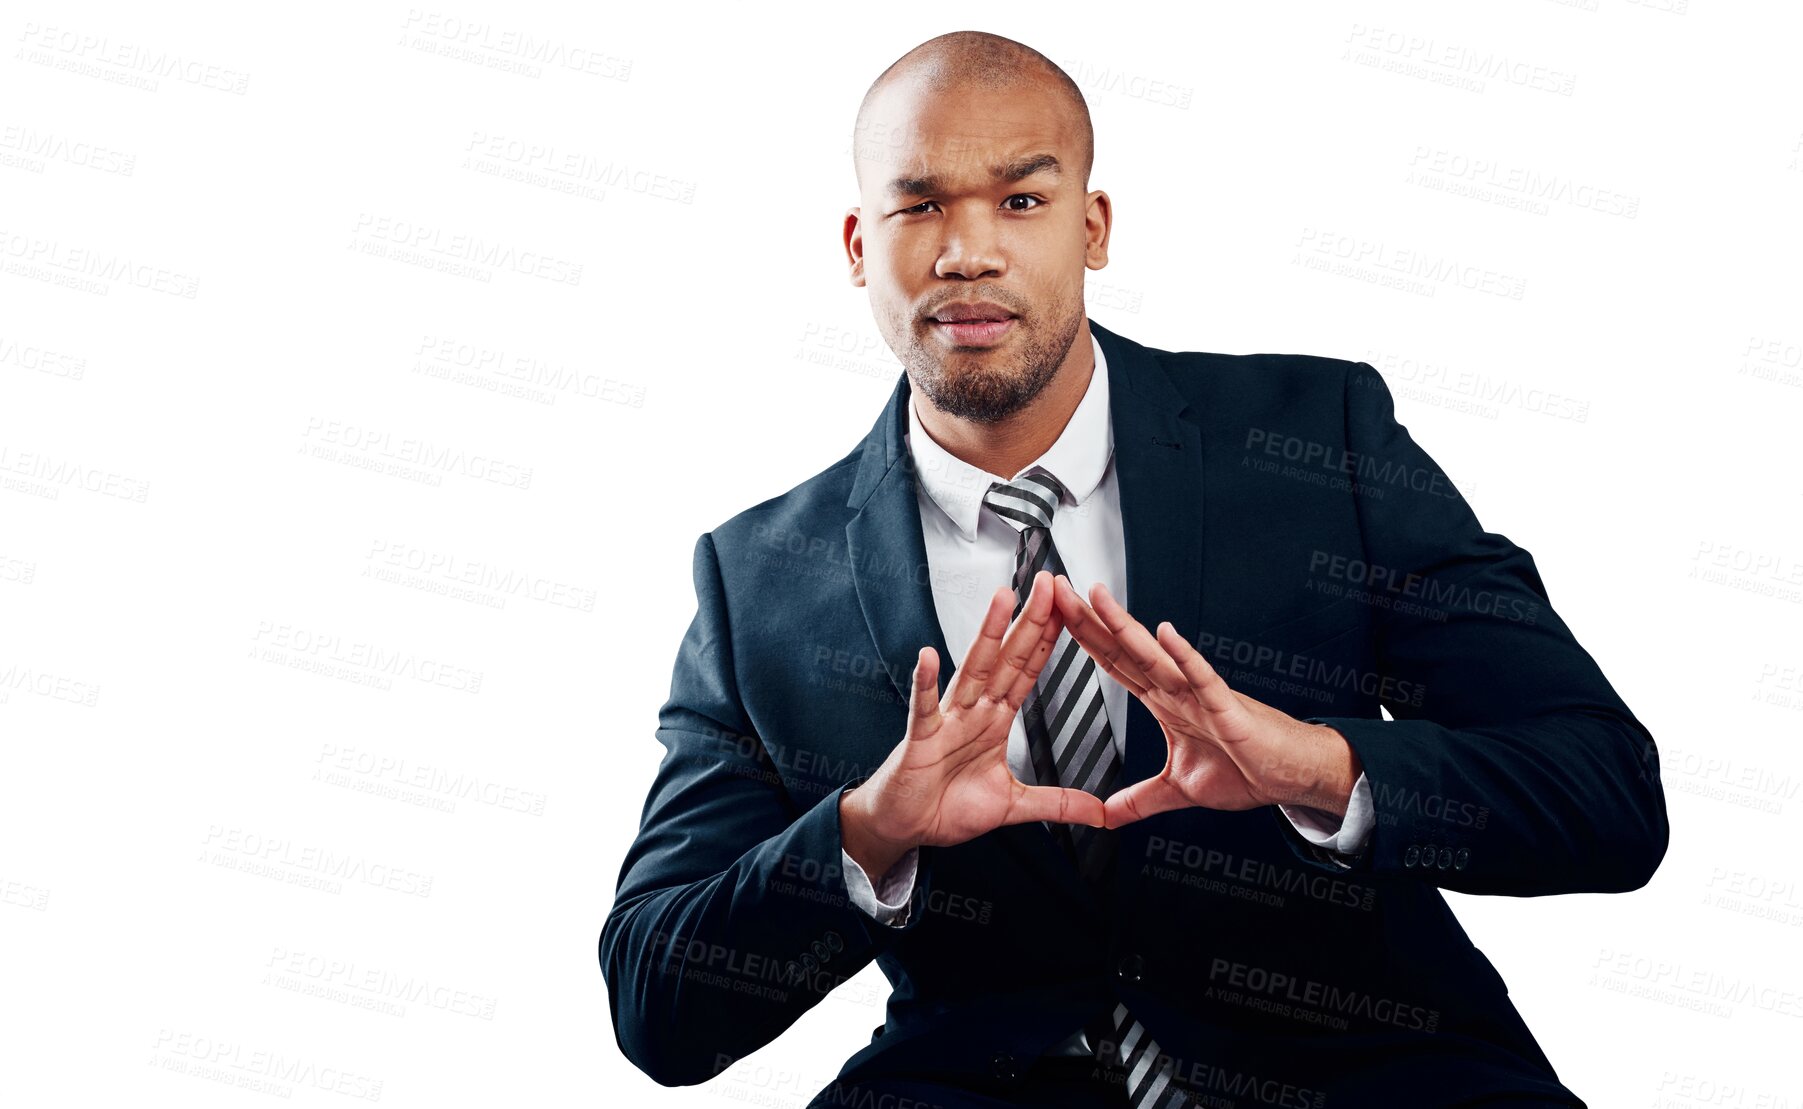 Buy stock photo Hand, business man and triangle gesture in portrait isolated on a transparent png background. Person frame fingers in pyramid sign, confident professional consultant and face of employee with shape